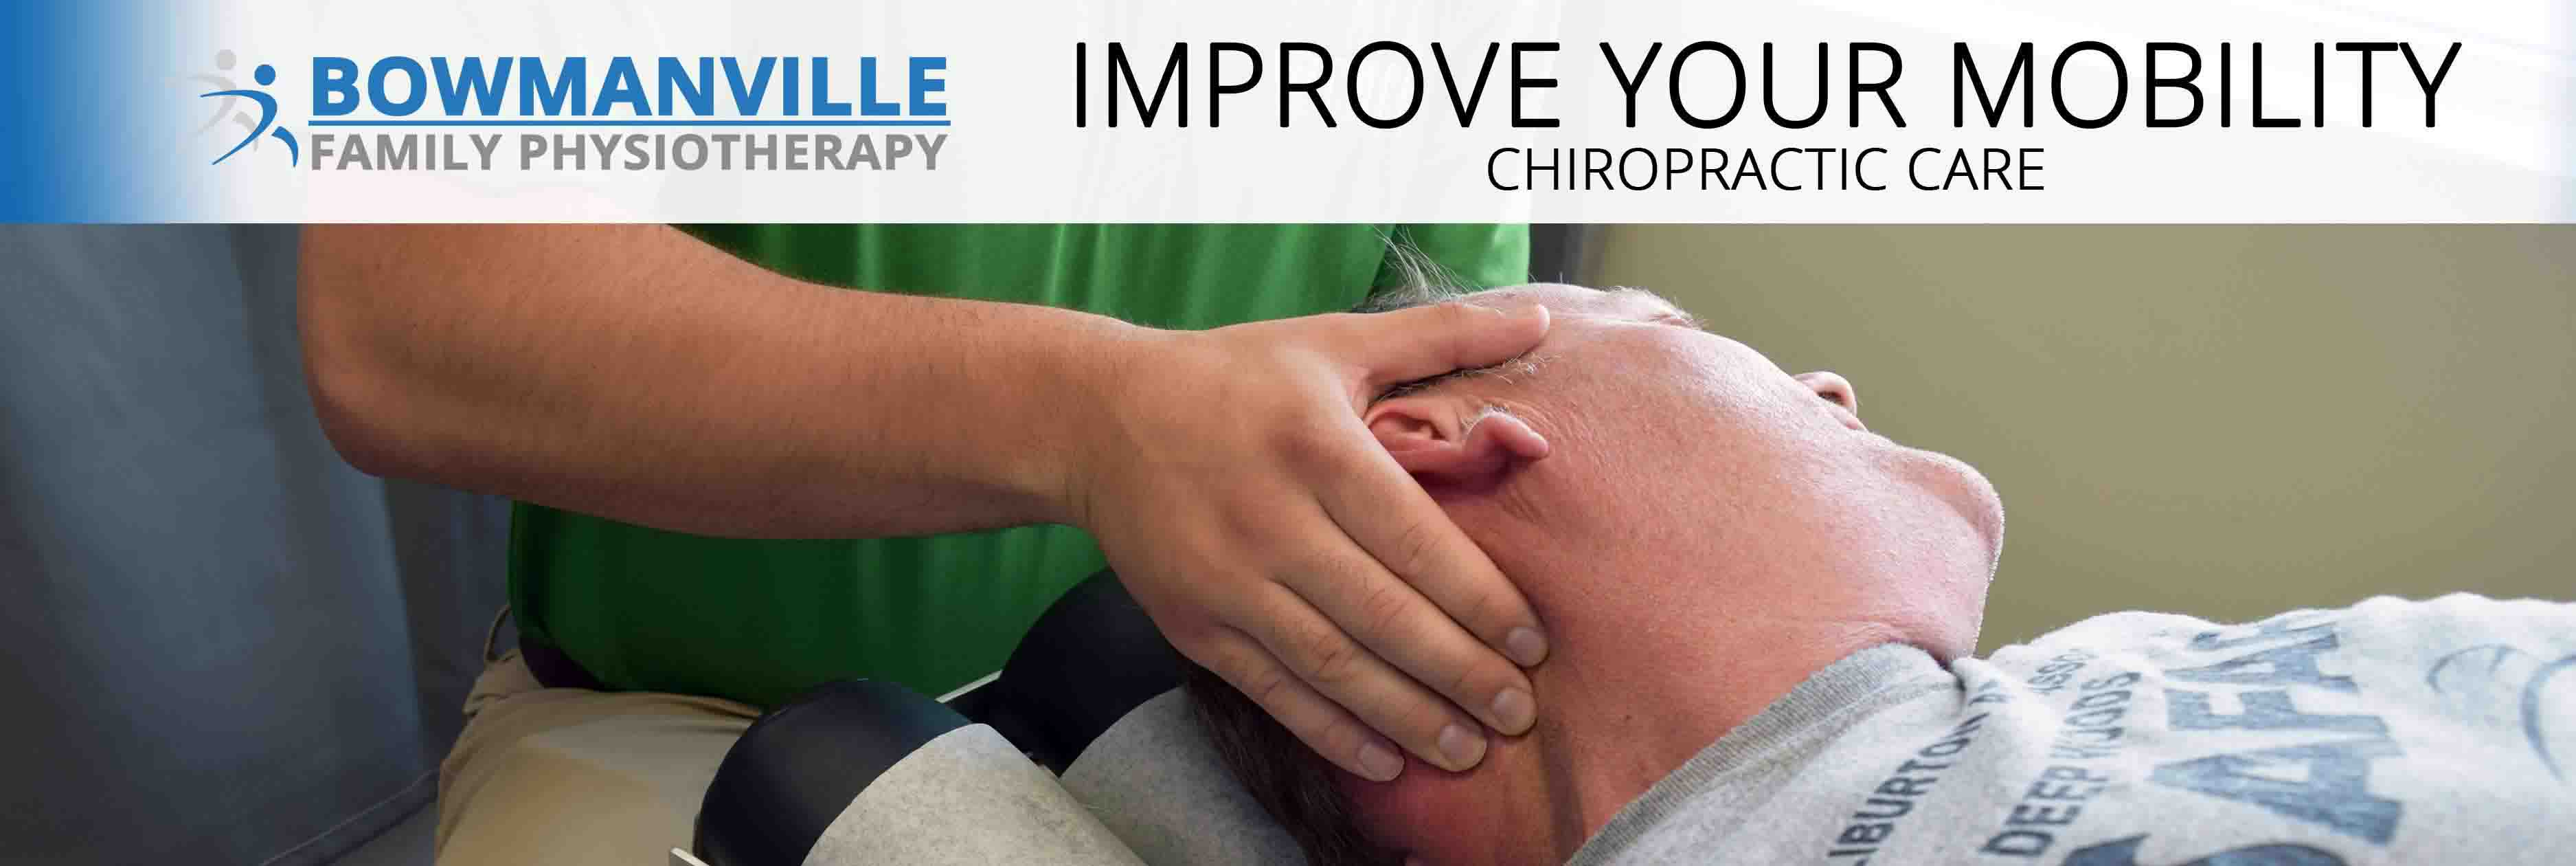 chiropractor in courtice